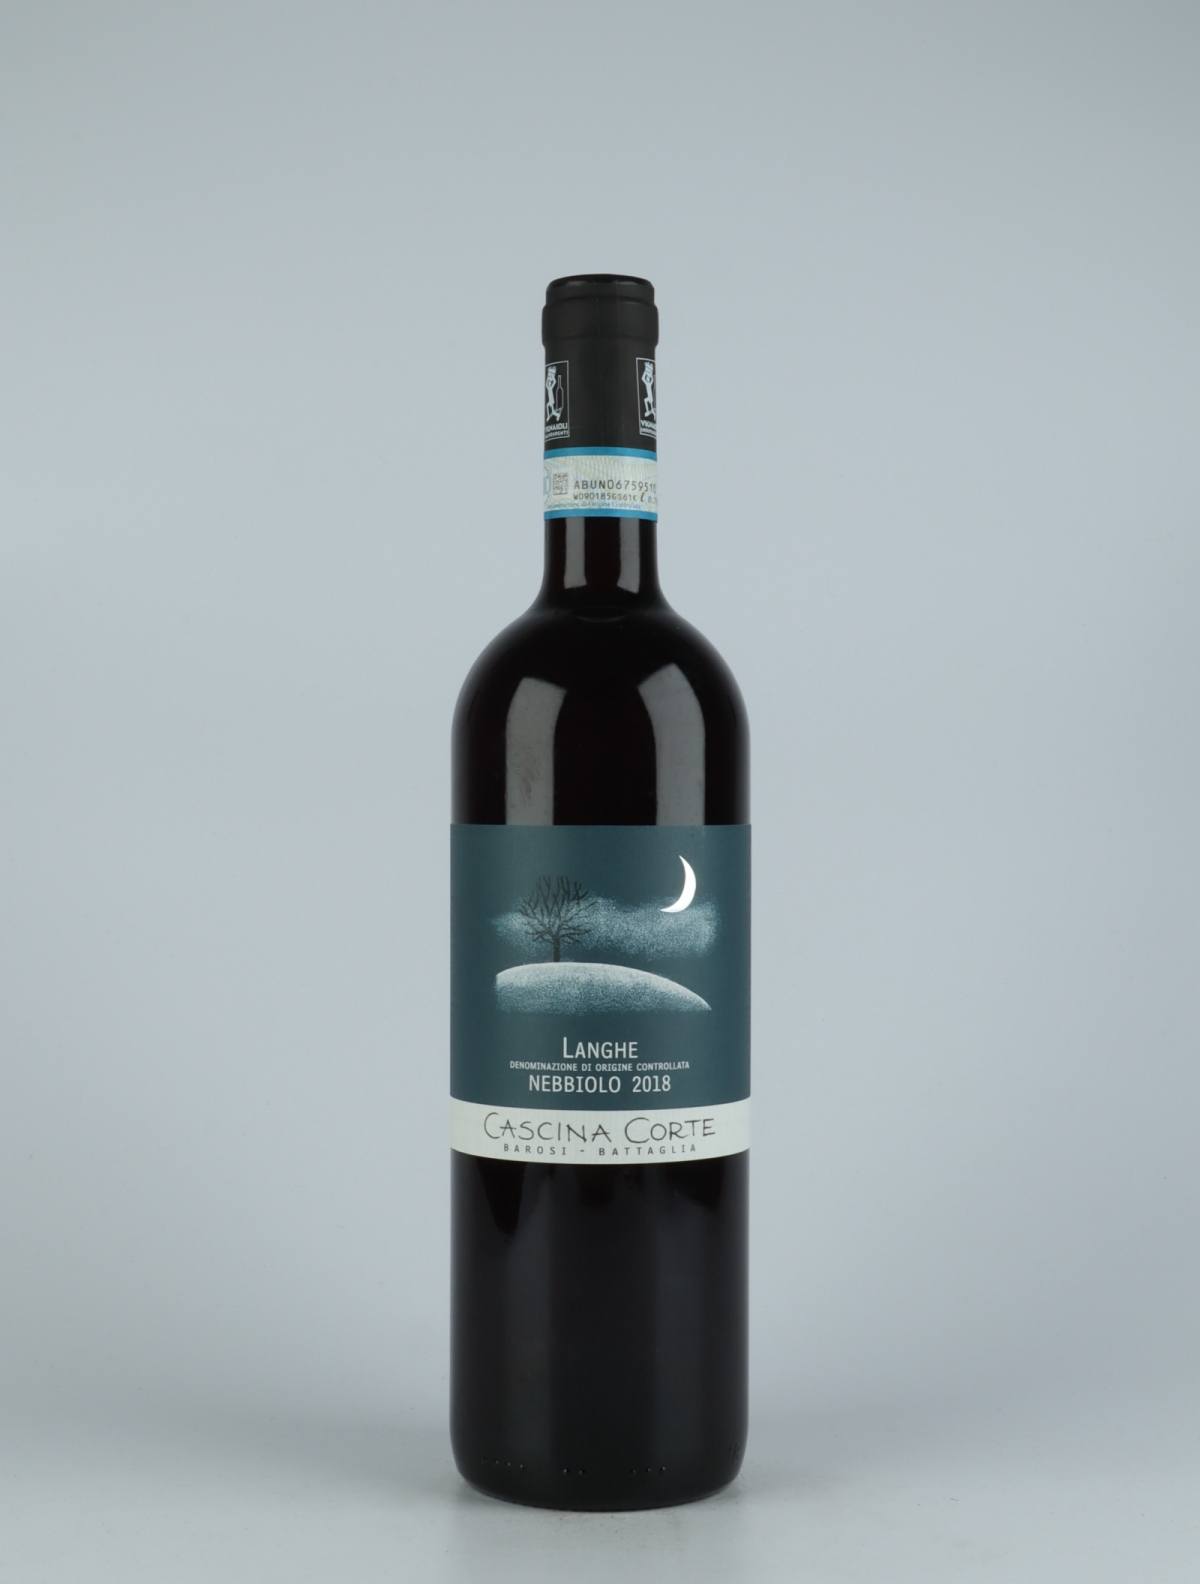 A bottle 2018 Langhe Nebbiolo Red wine from Cascina Corte, Piedmont in Italy